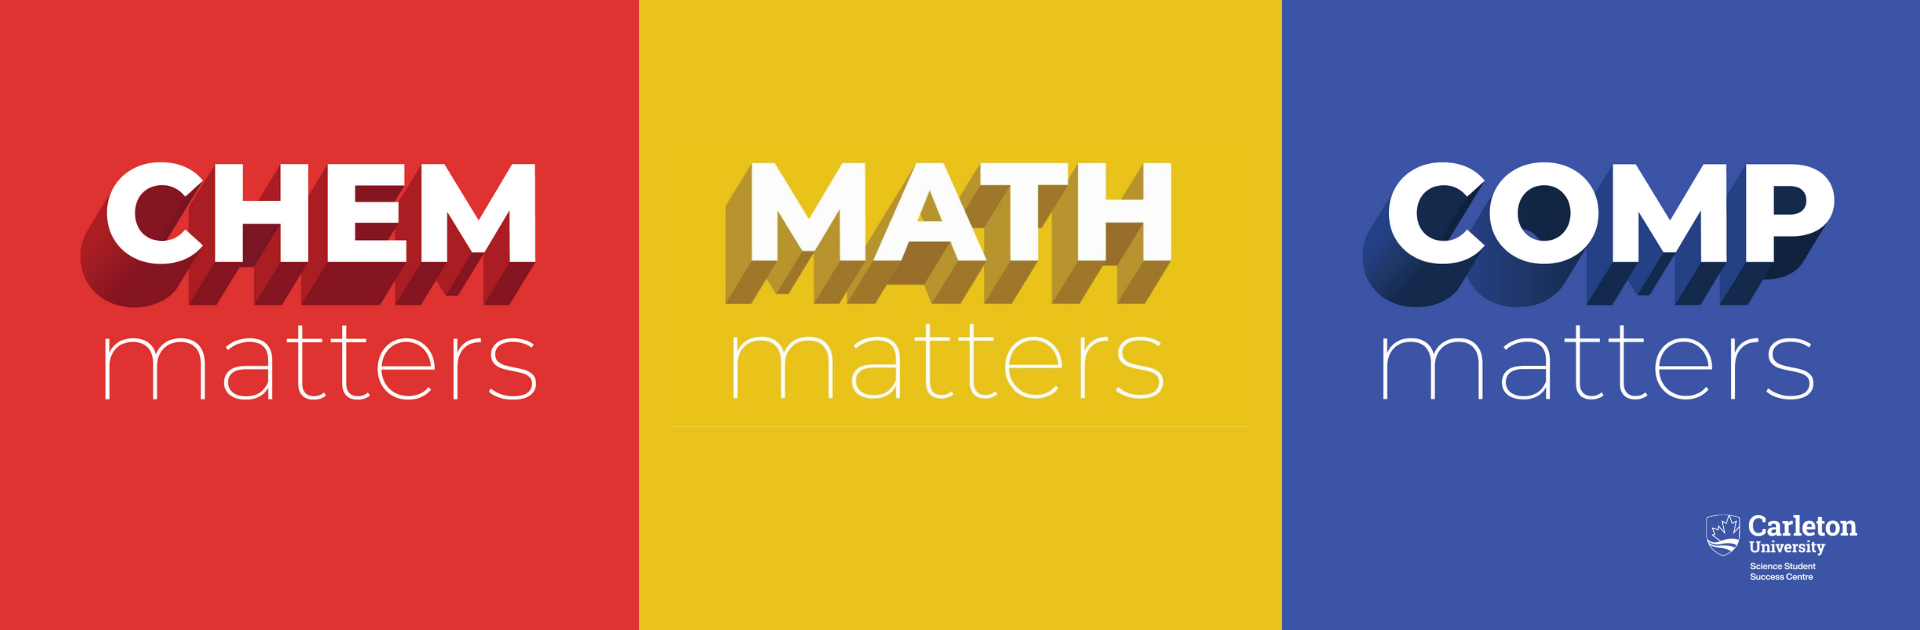 Promotional image for MATH, COMP and CHEM Matters